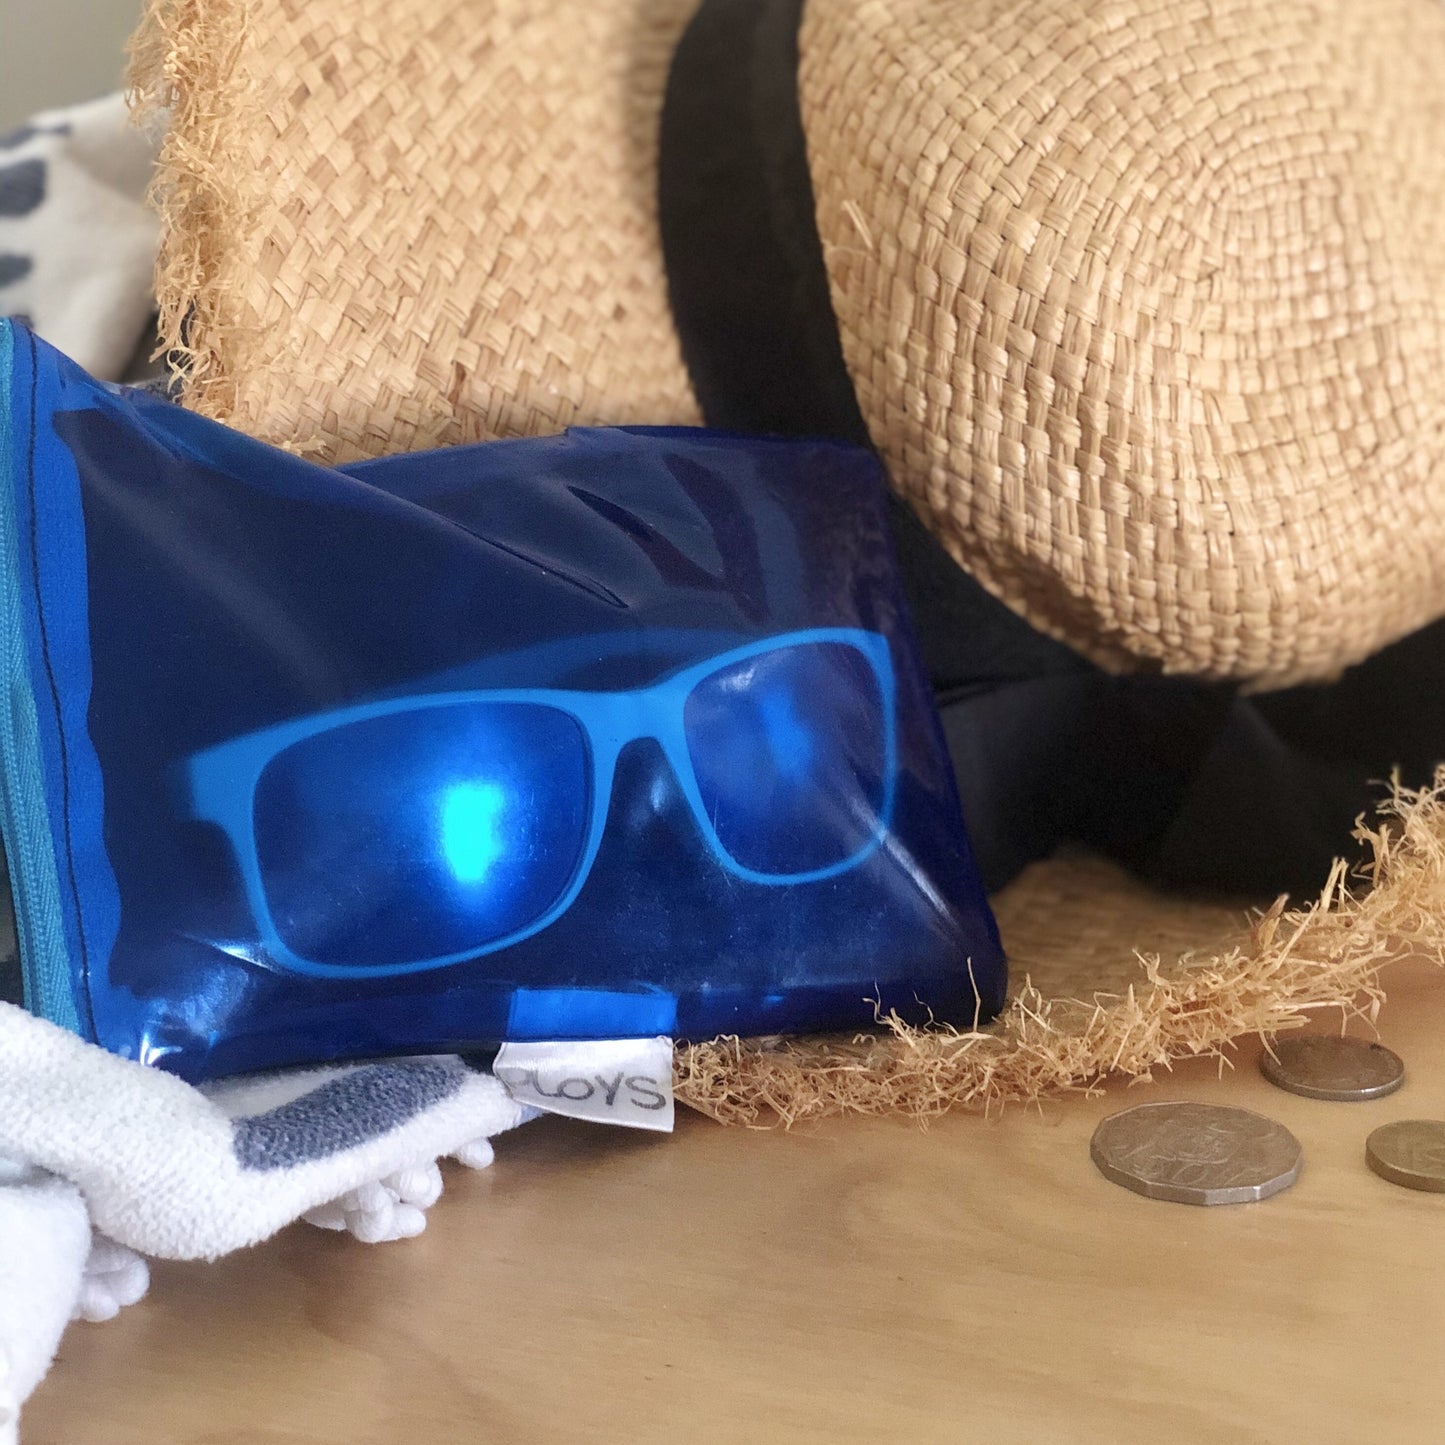 Sunglasses case or iPhone, smartphone case, made from upcycled PVC from pooltoys and airmattreses. Providing a durable sturdy protection against sand and damage. Water resistant